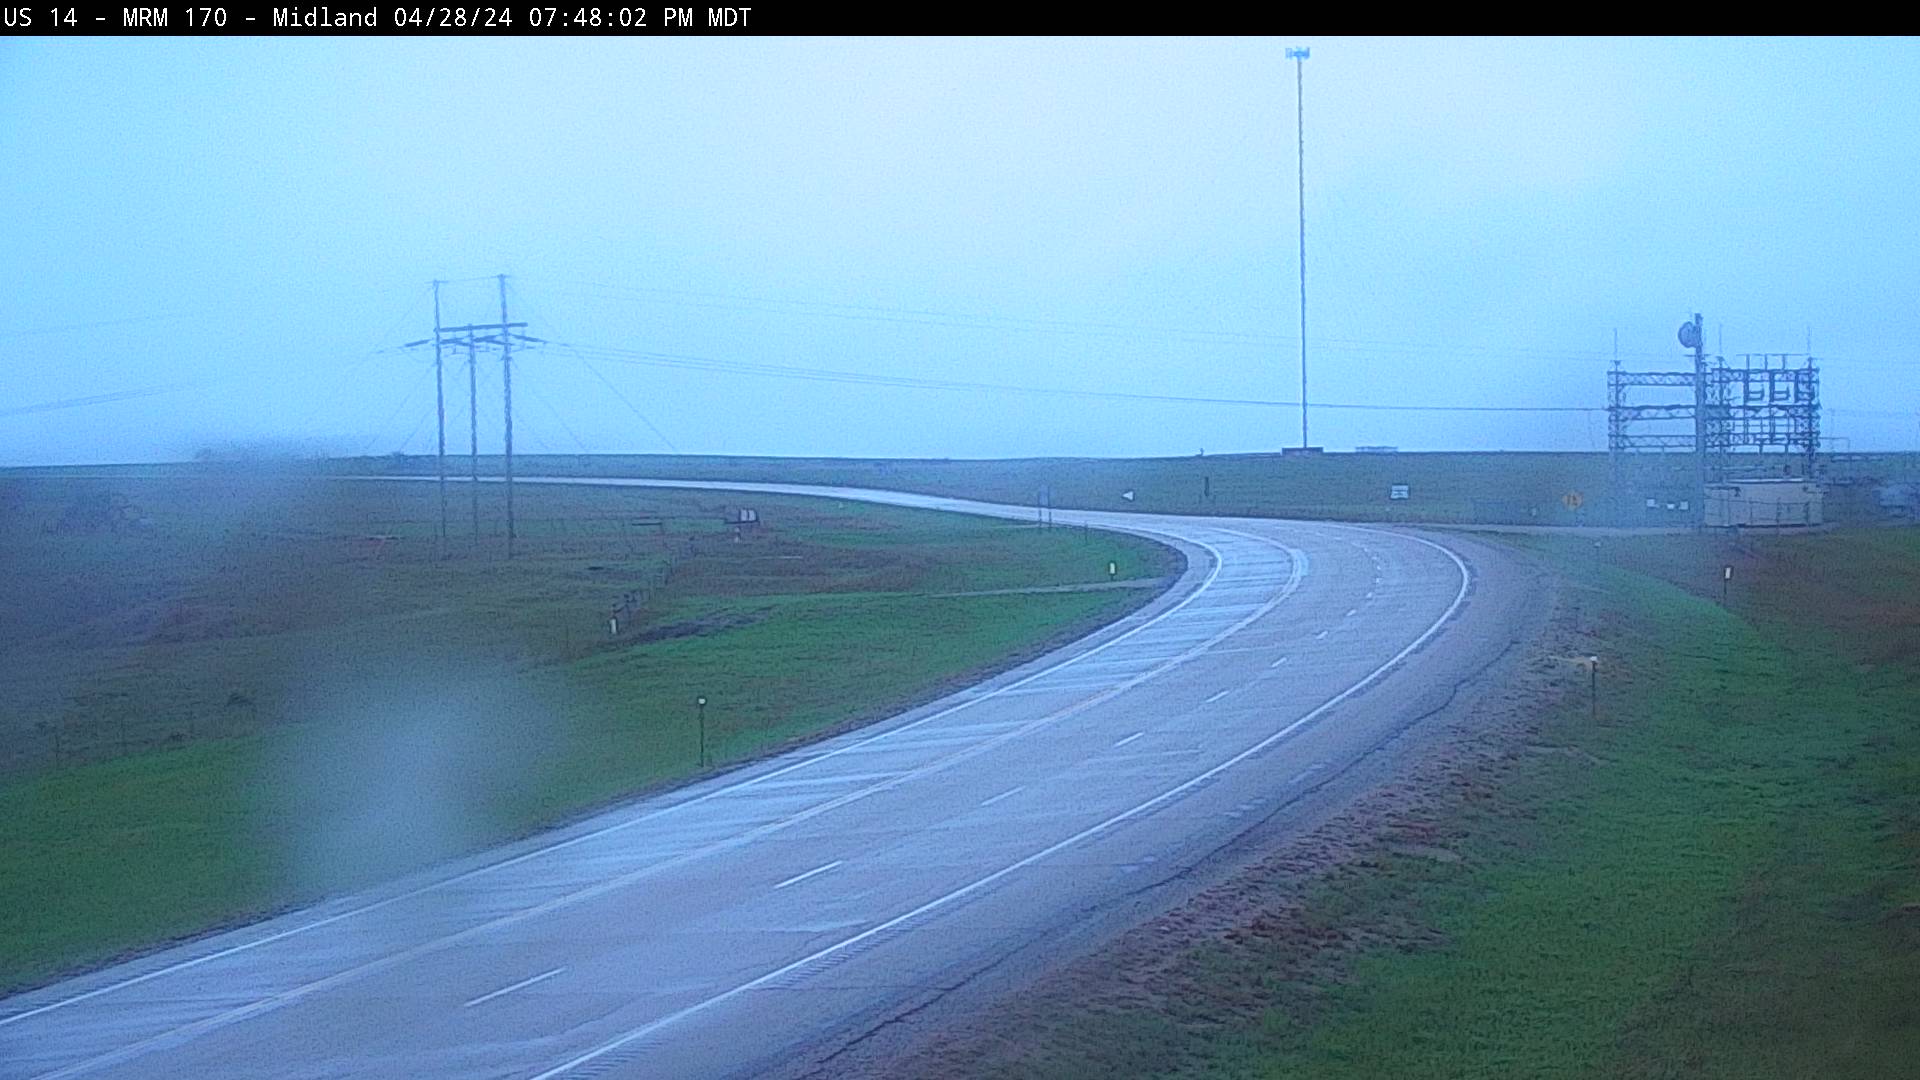 1 mile east of town along US-14 @ MP 170 - Northeast Traffic Camera